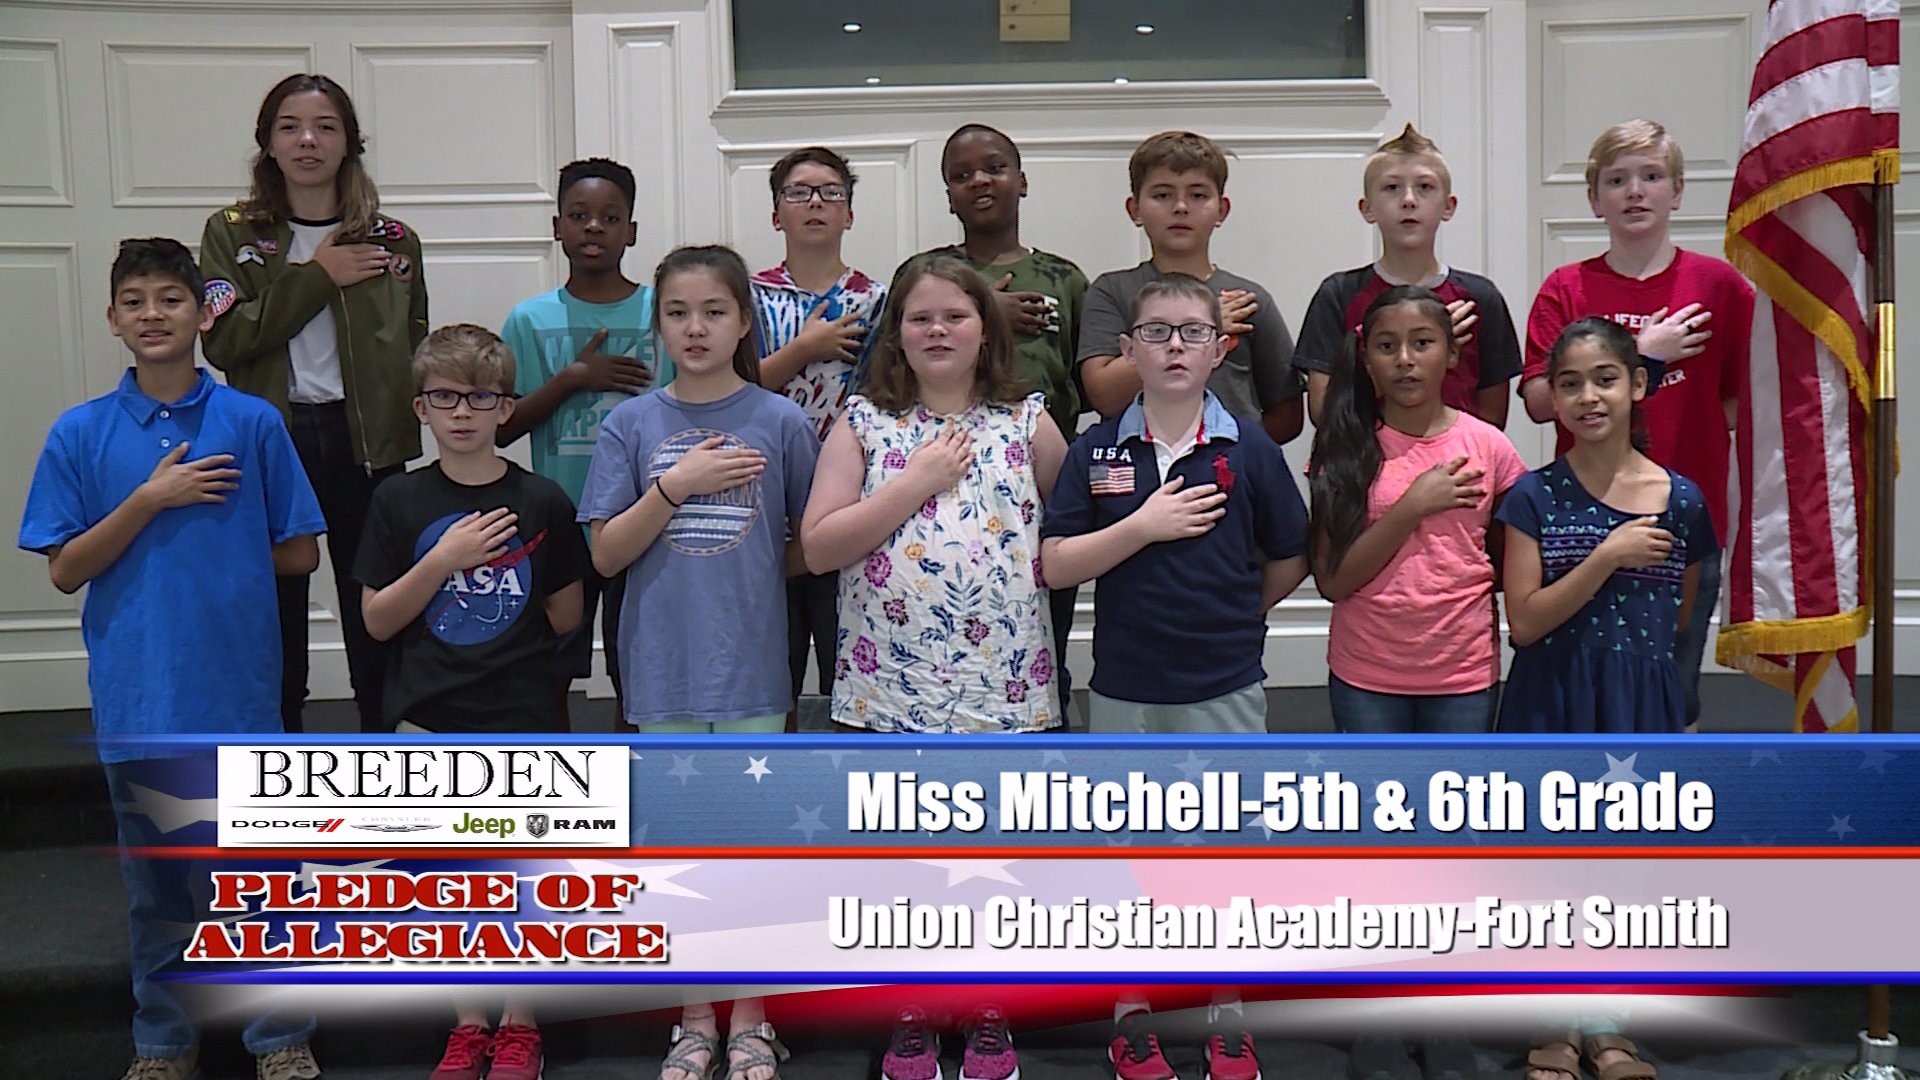 Miss. Mitchell- 5th & 6th Grade Union Christian Academy, Fort Smith